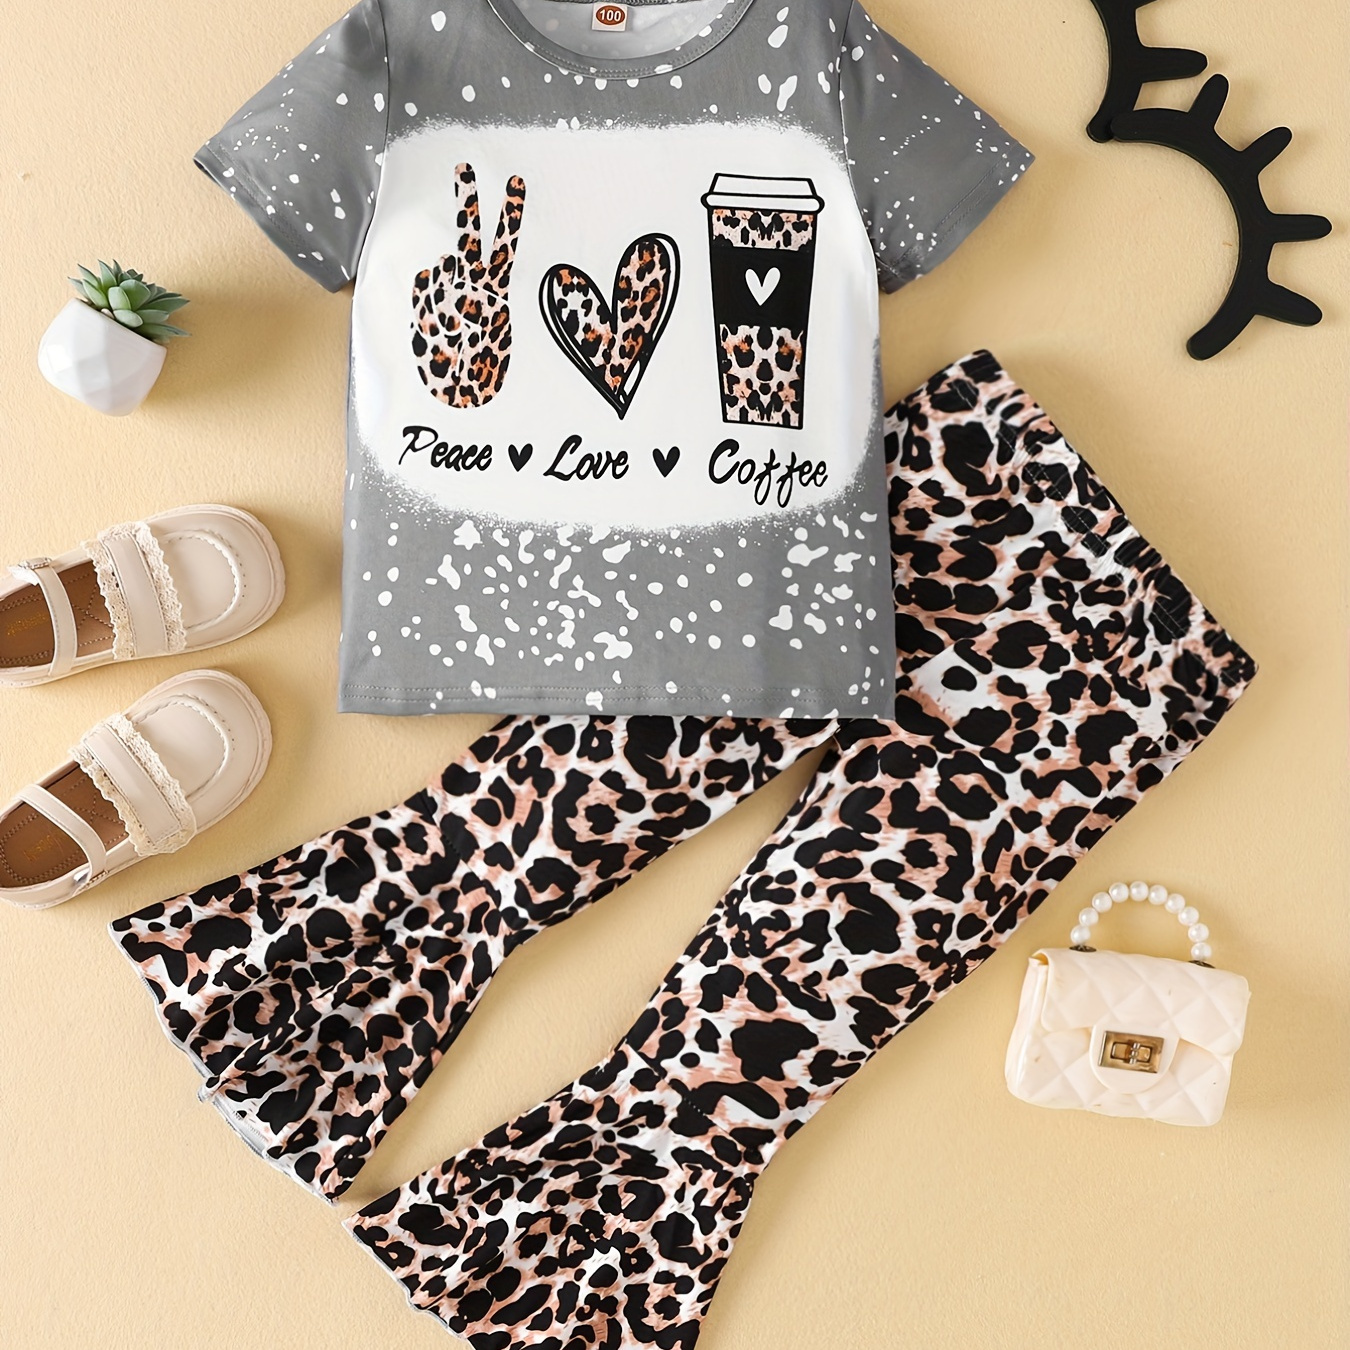 

Girl's 2pcs T-shirt & Elastic Waist Flared Pants Set, Peace Love Coffee Print Short Sleeve Tee Top, Leopard Print Casual Outfits, Kids Clothes For Summer